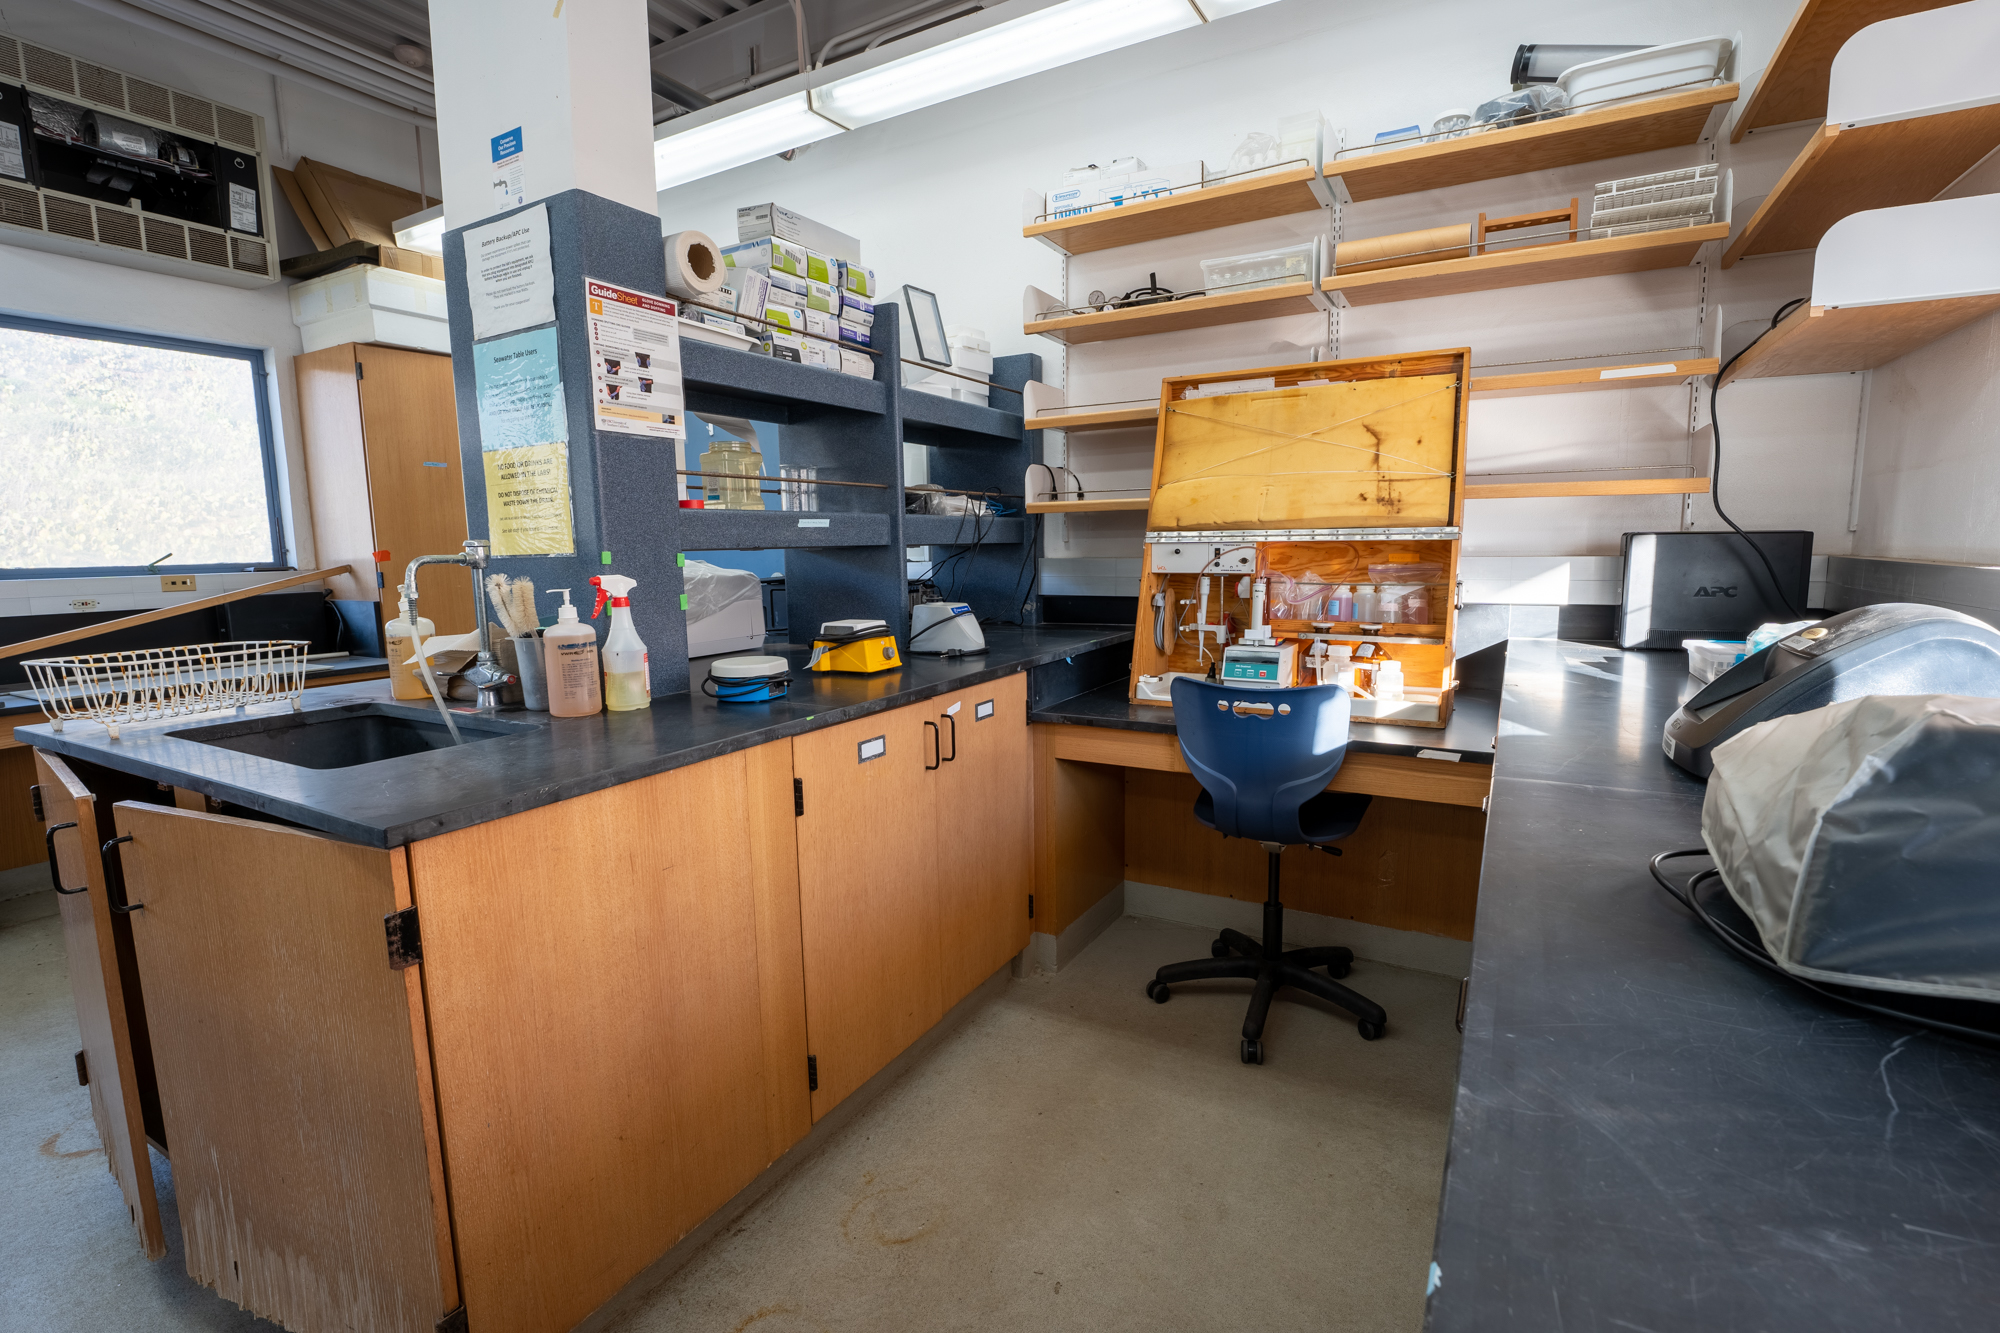 a science lab with cupboards, slate work surfaces, and standard lab equipment